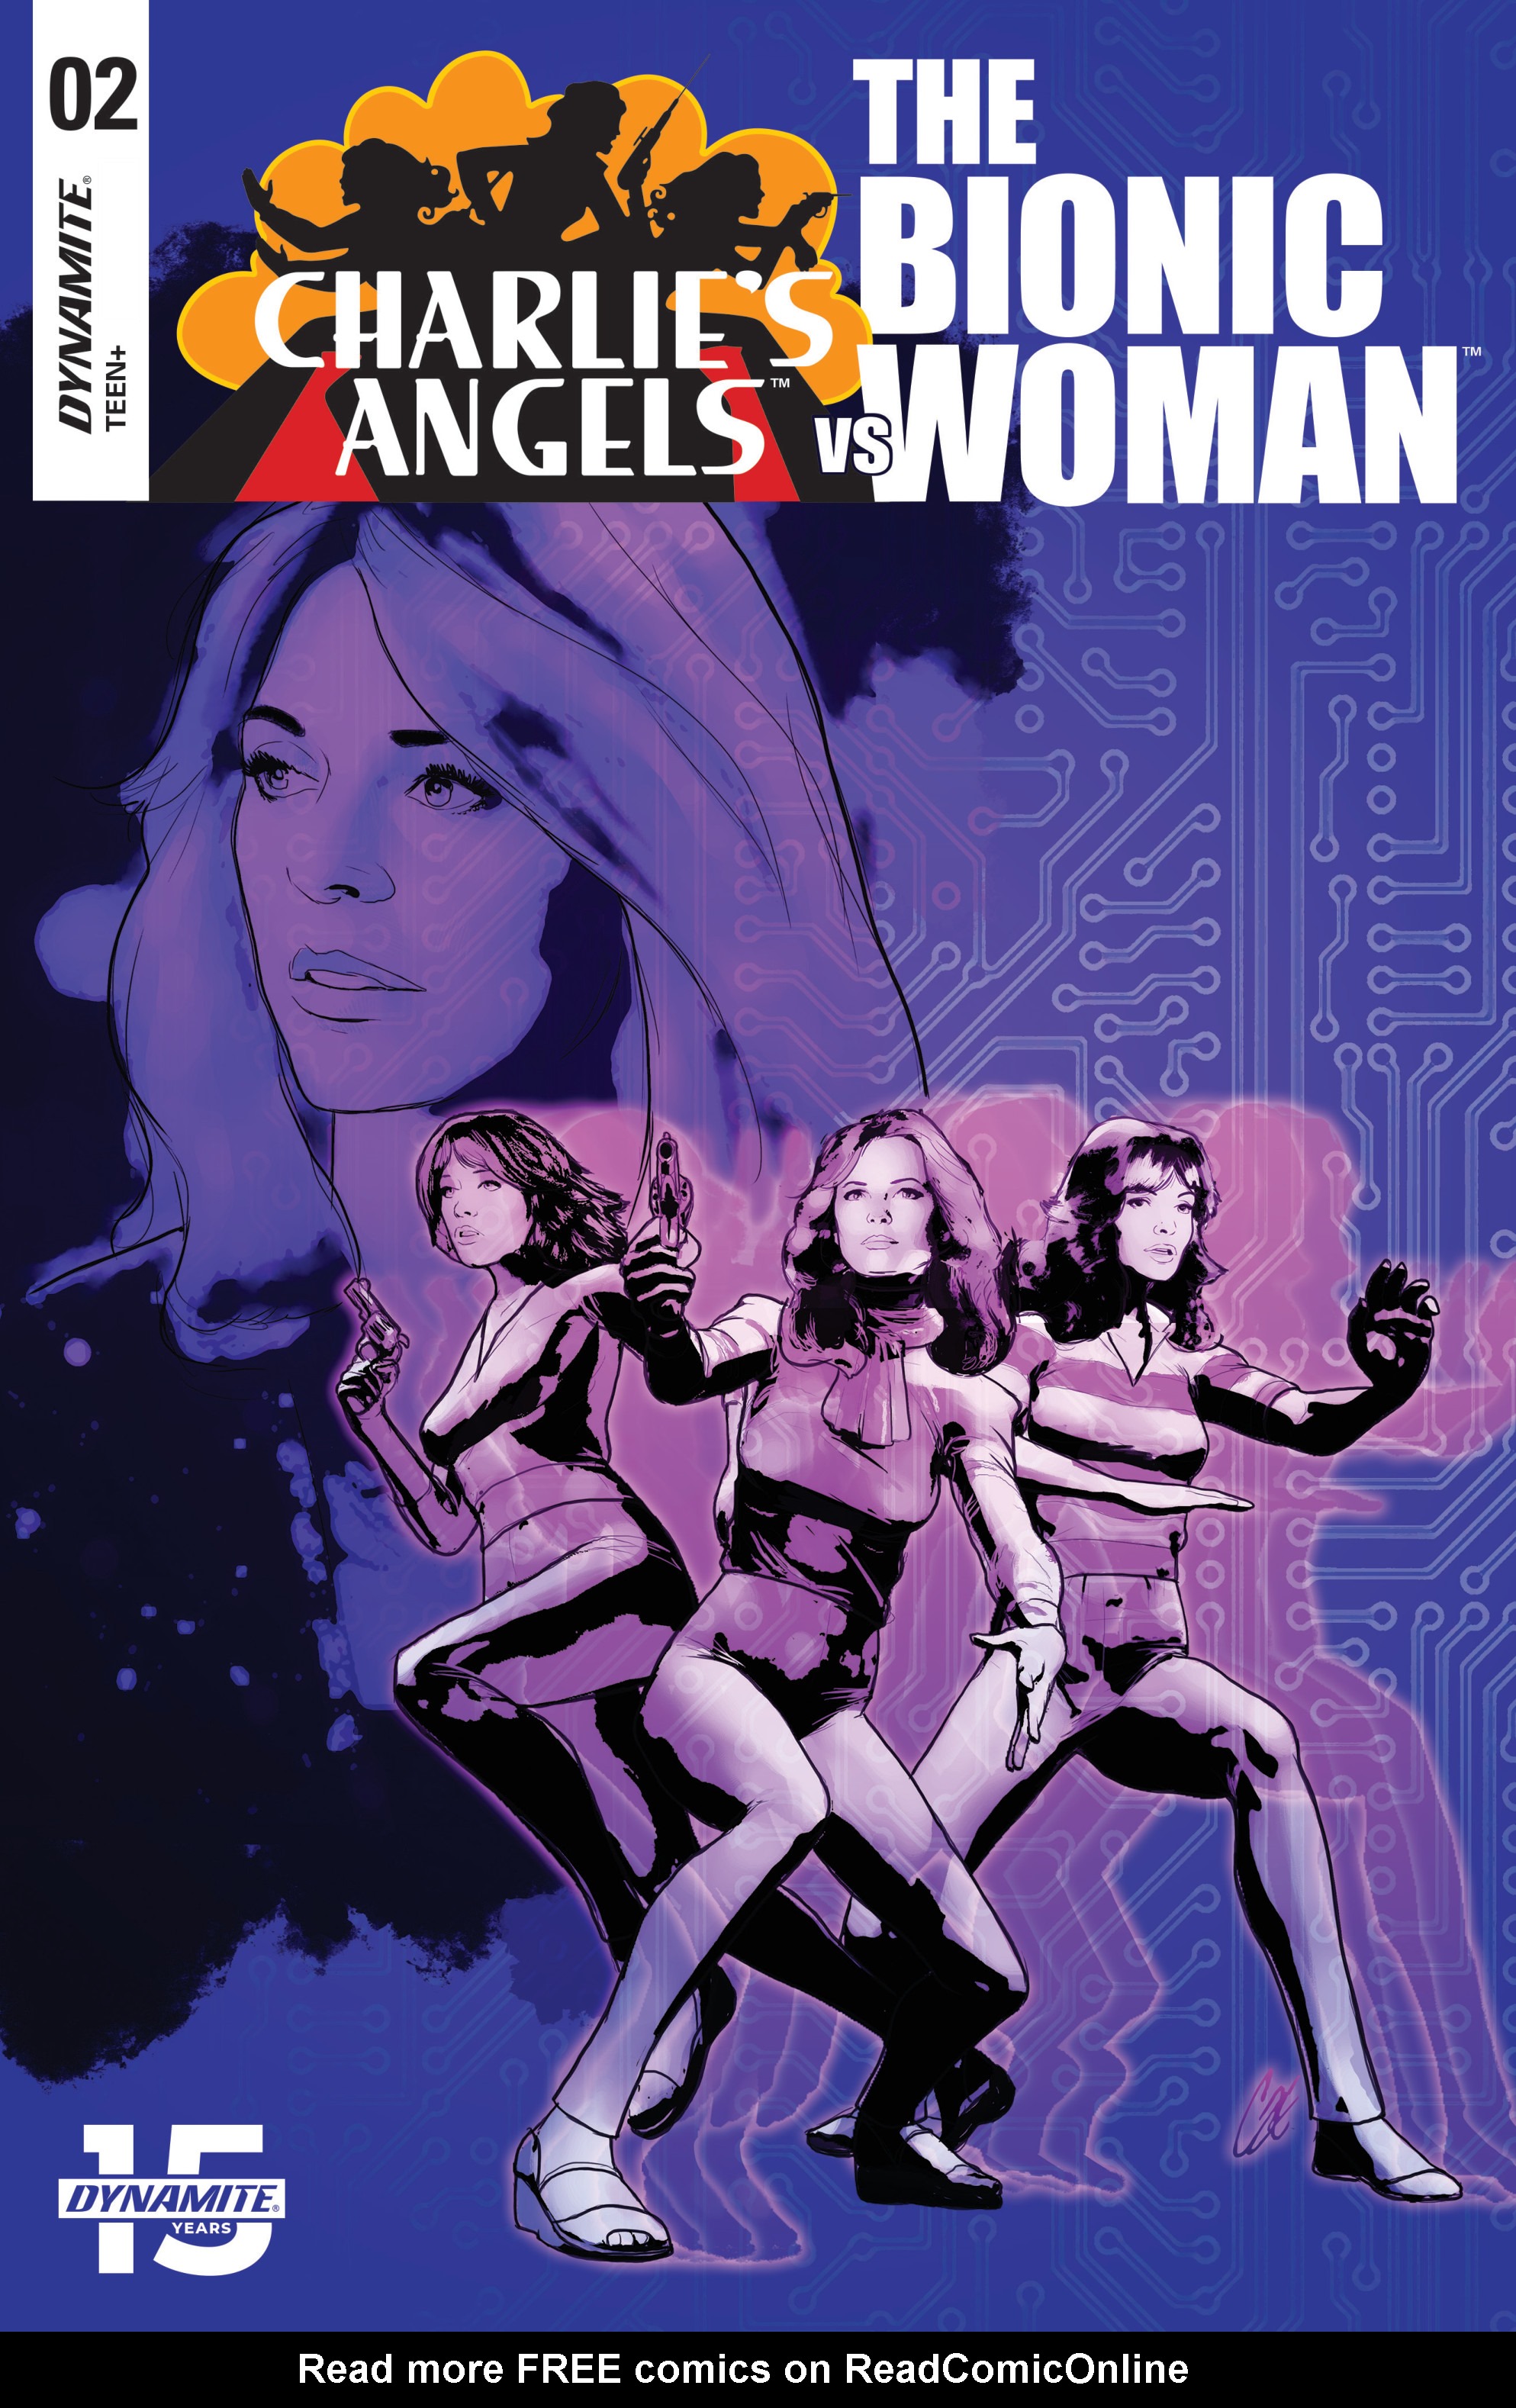 Read online Charlie's Angels vs. The Bionic Woman comic -  Issue #2 - 1